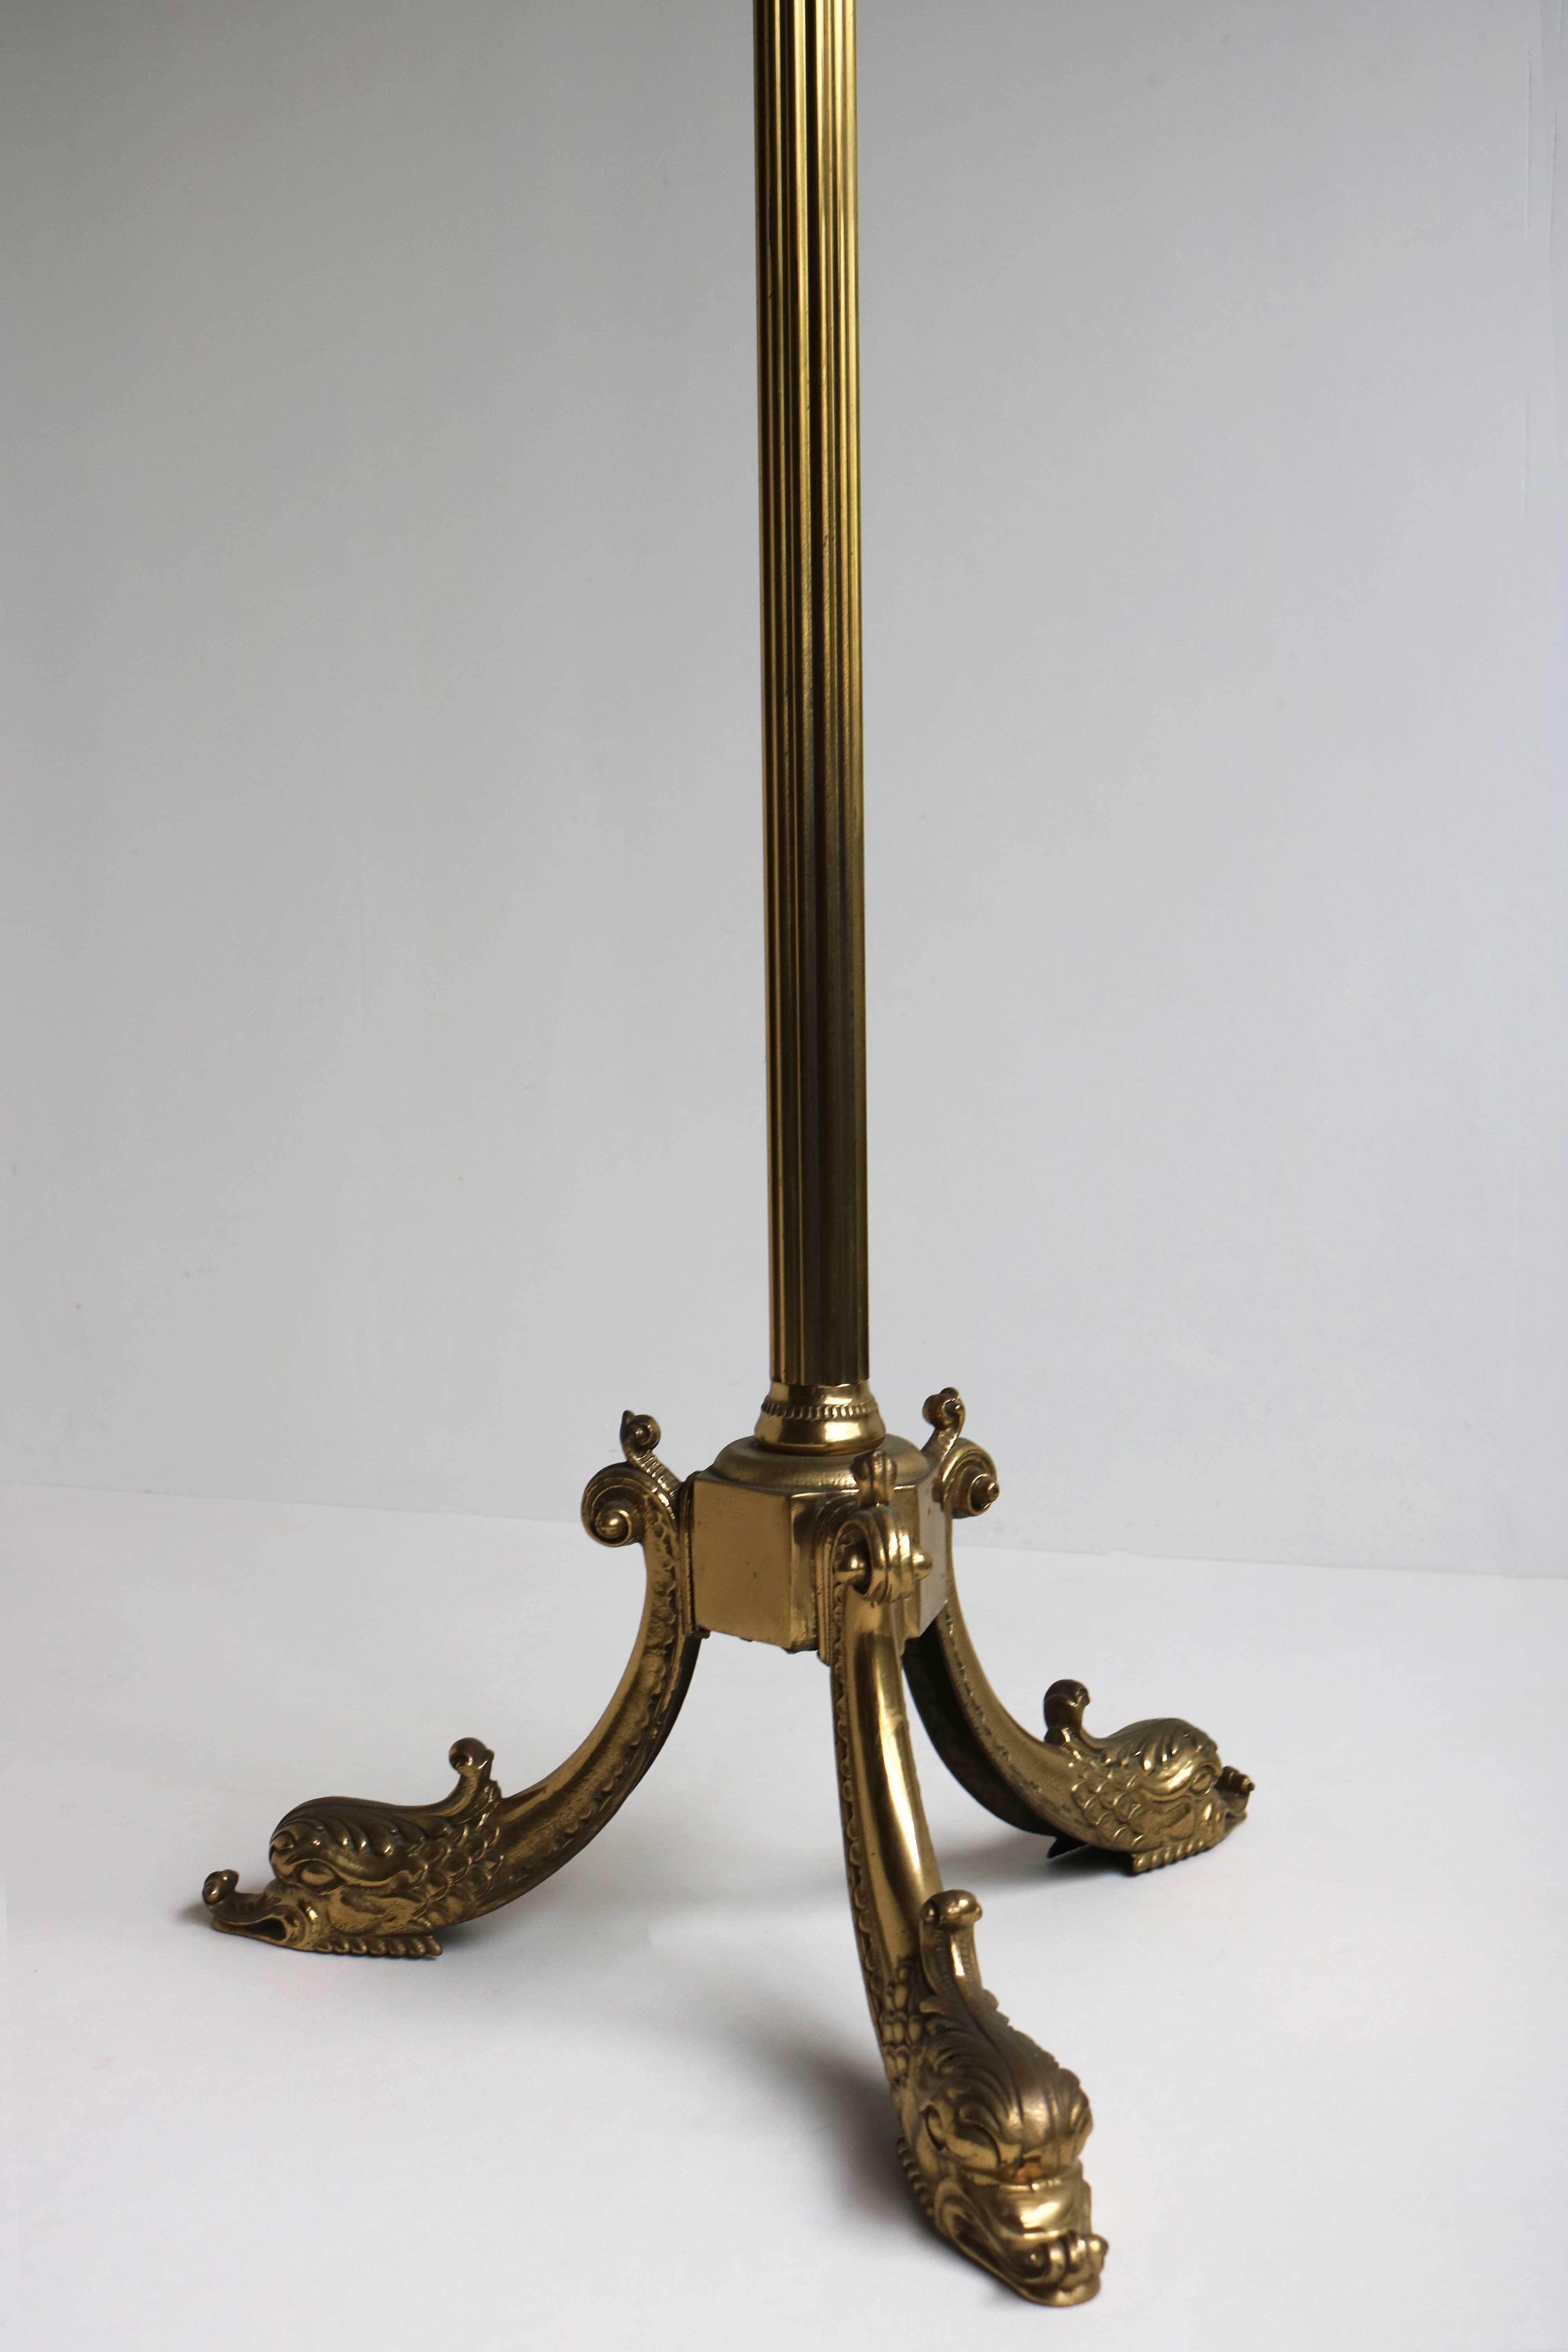 Ornate Brass Free Standing Coat Hat Rack Italian Hall Tree Stand Dolphin, 1960s For Sale 6